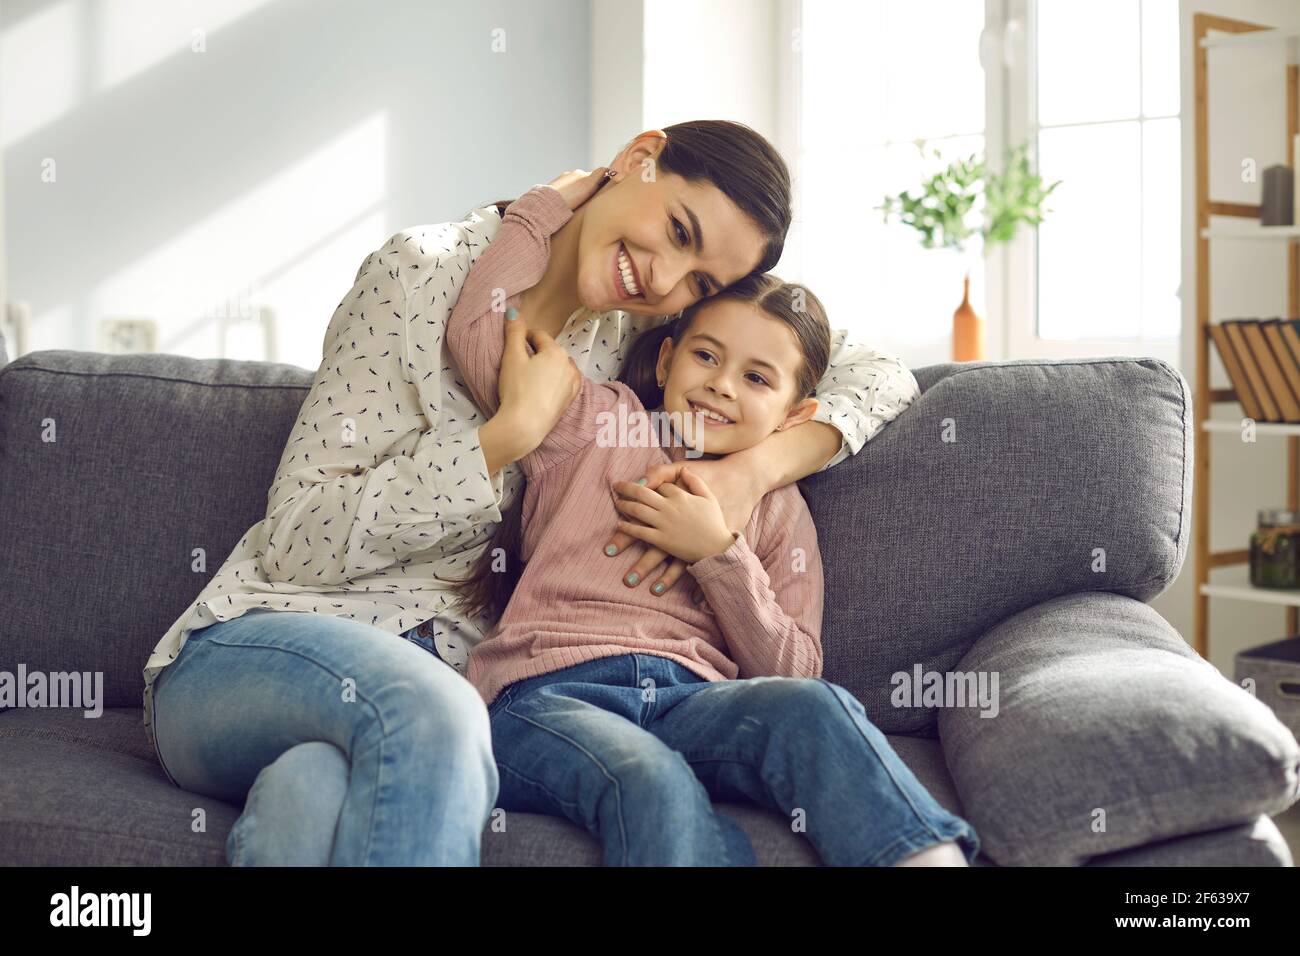 Portrait of happy smiling young mother hug cuddle with daughter sitting on sofa Stock Photo